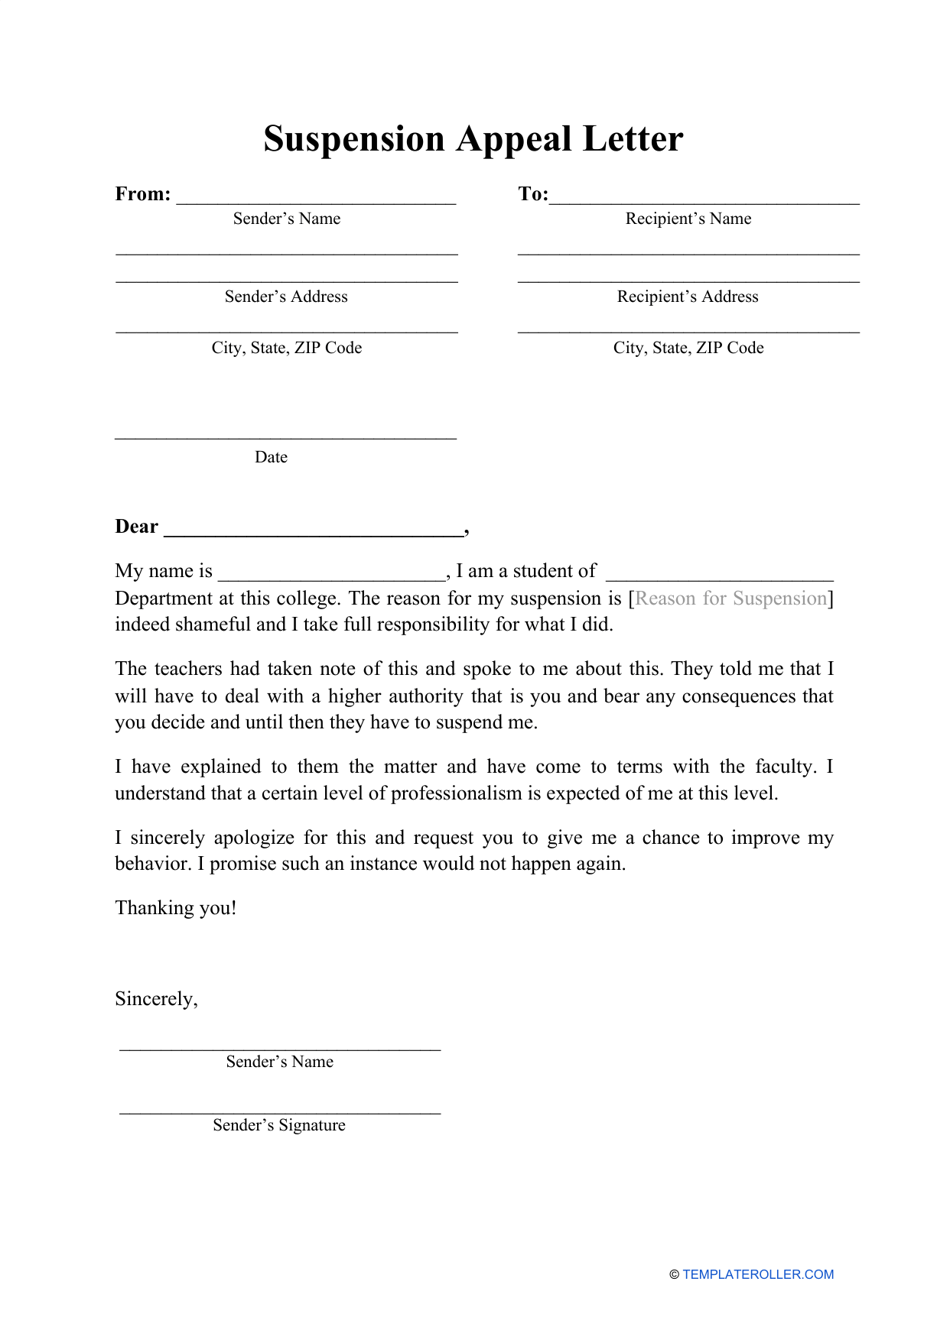 Suspension Appeal Letter Template, Page 1